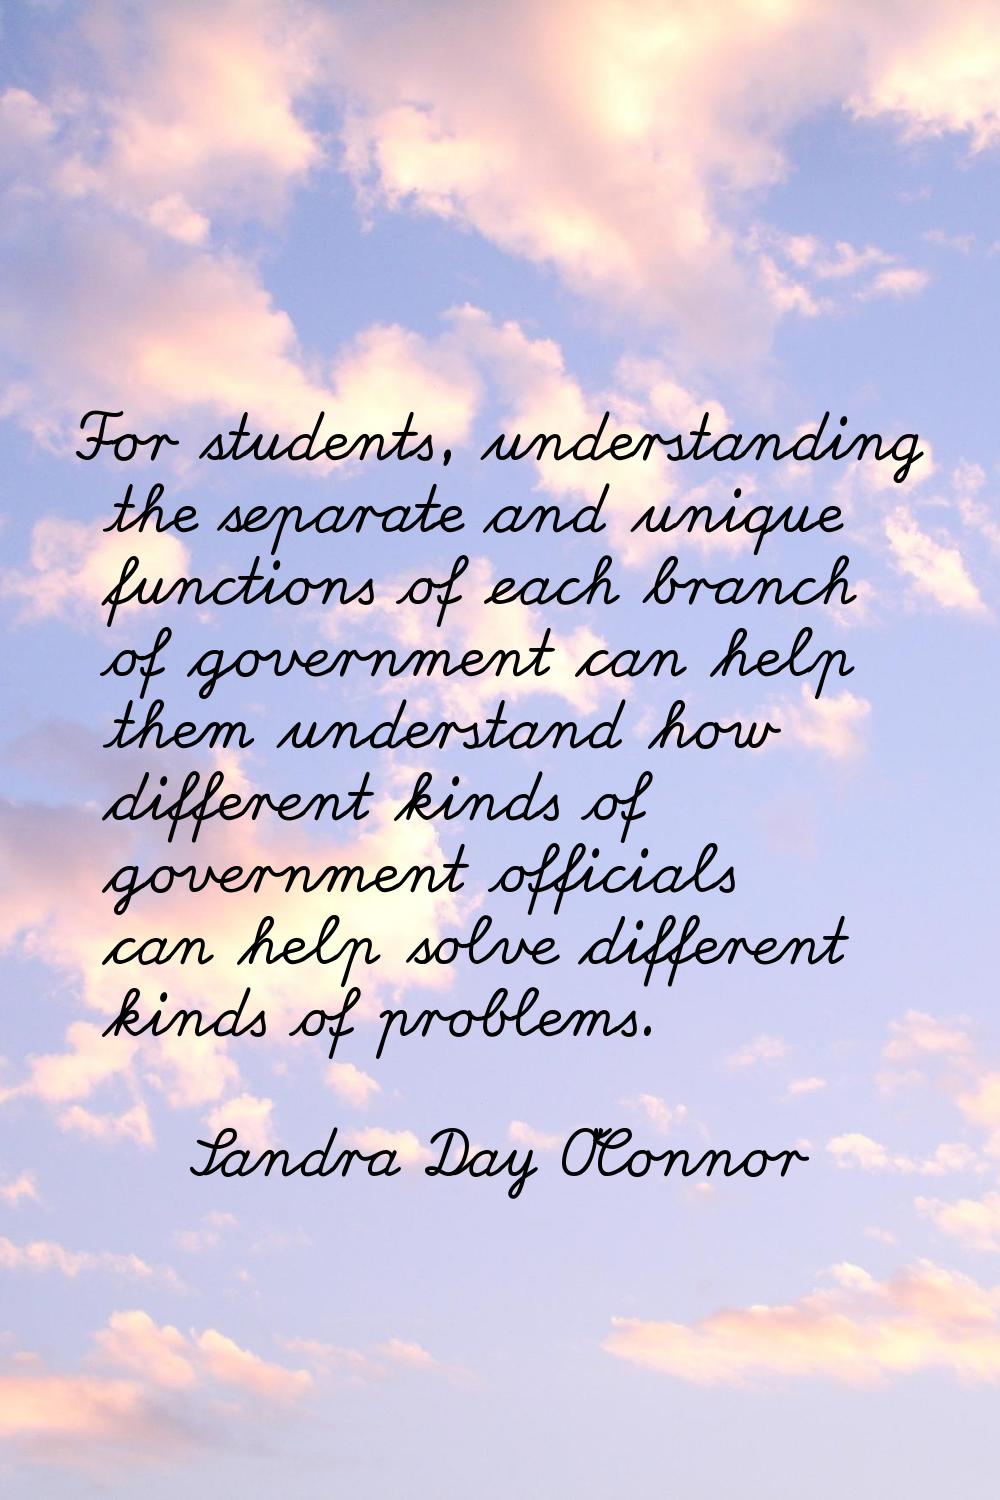 For students, understanding the separate and unique functions of each branch of government can help